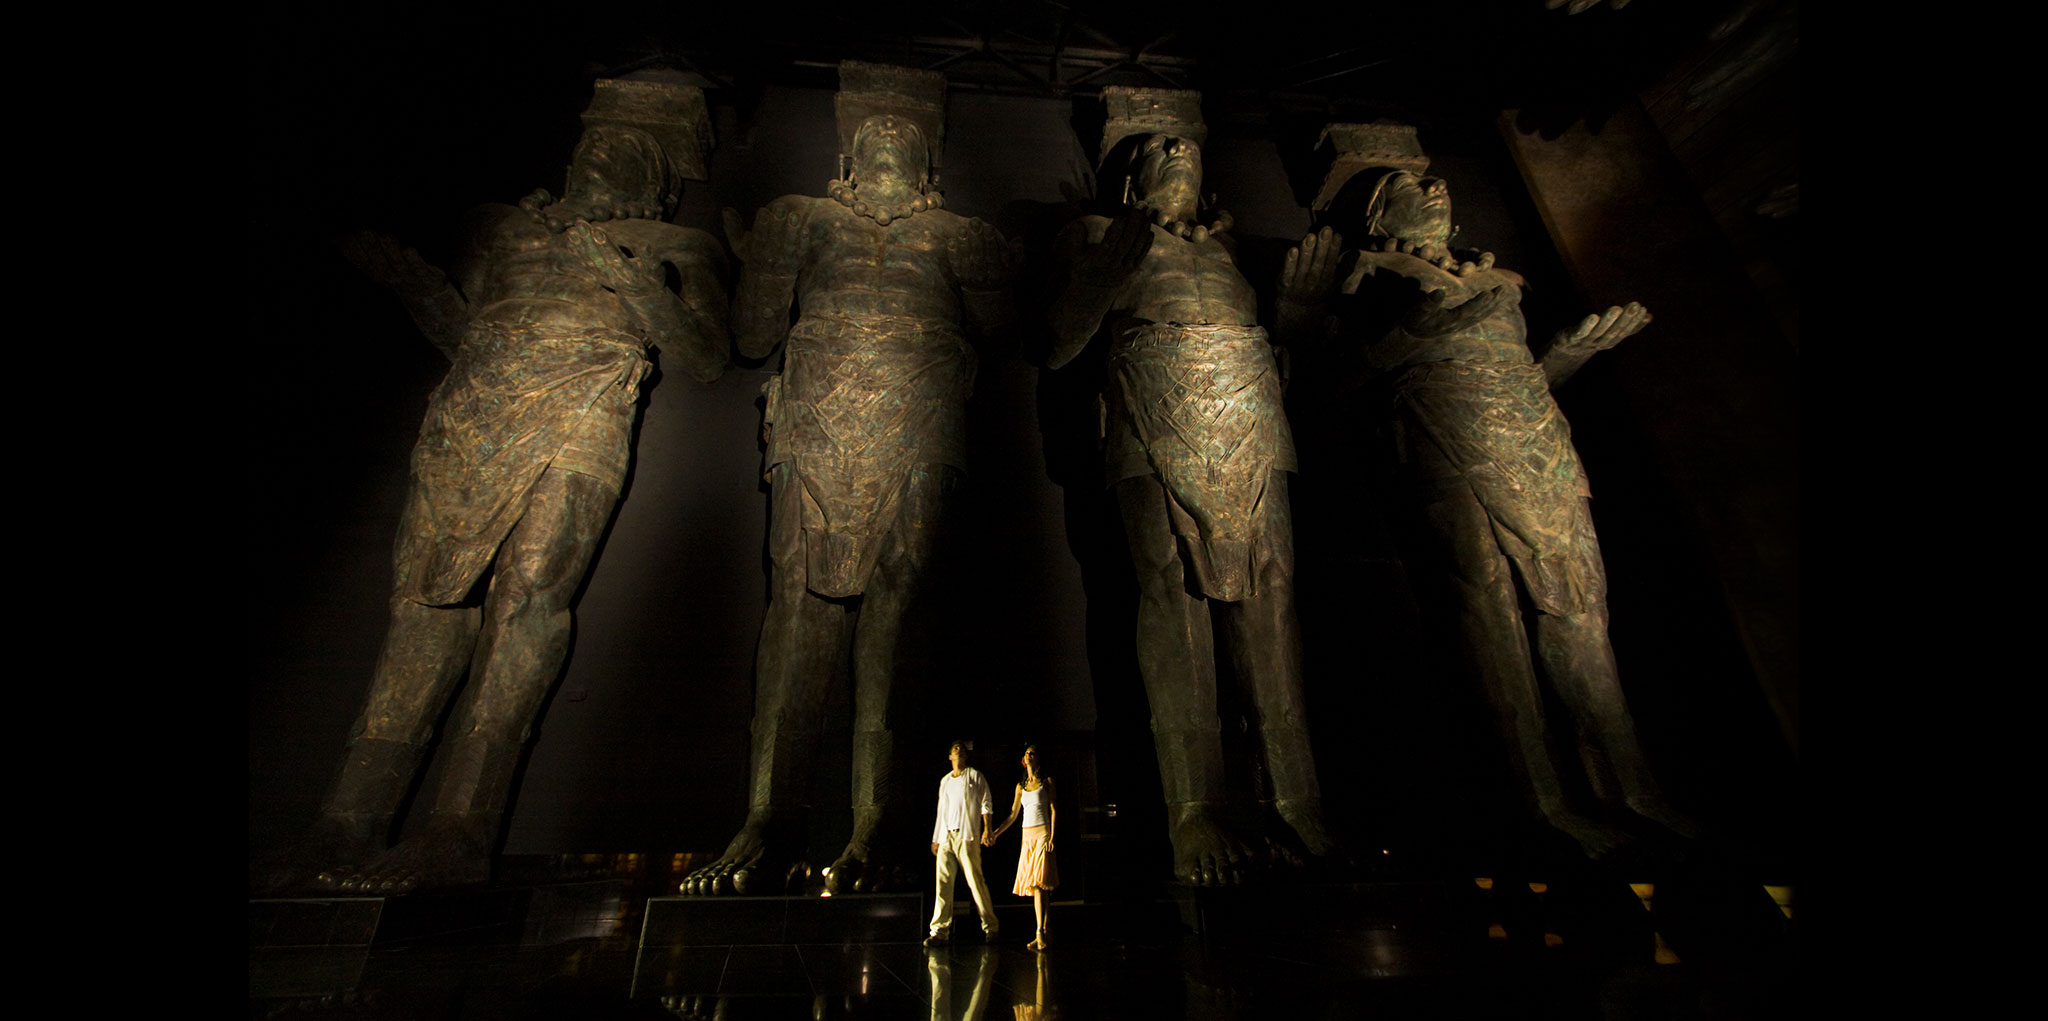 Living Giants: The Myth behind The Grand Mayan Statues